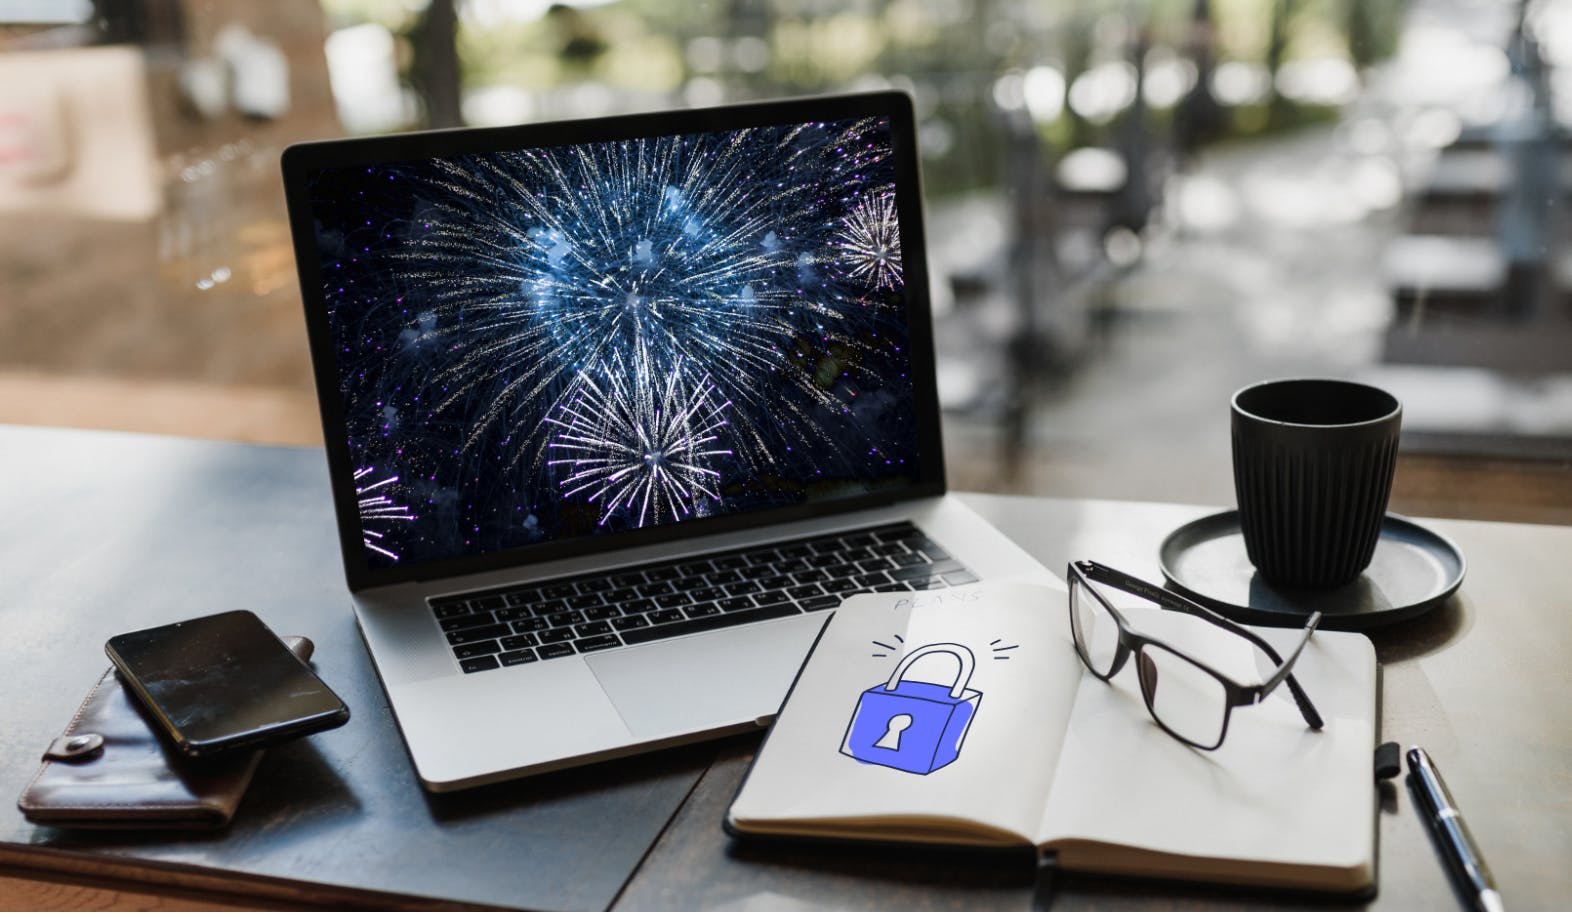 A photograph of a laptop displaying purple and blue fireworks. On the left side of the laptop is a wallet and mobile laying on a table. On the right side of the laptop is a cup. In the front of the laptop is a notebook, with an illustration of a lock in the StartMail brand style. On top of the notebook there are reading glasses.